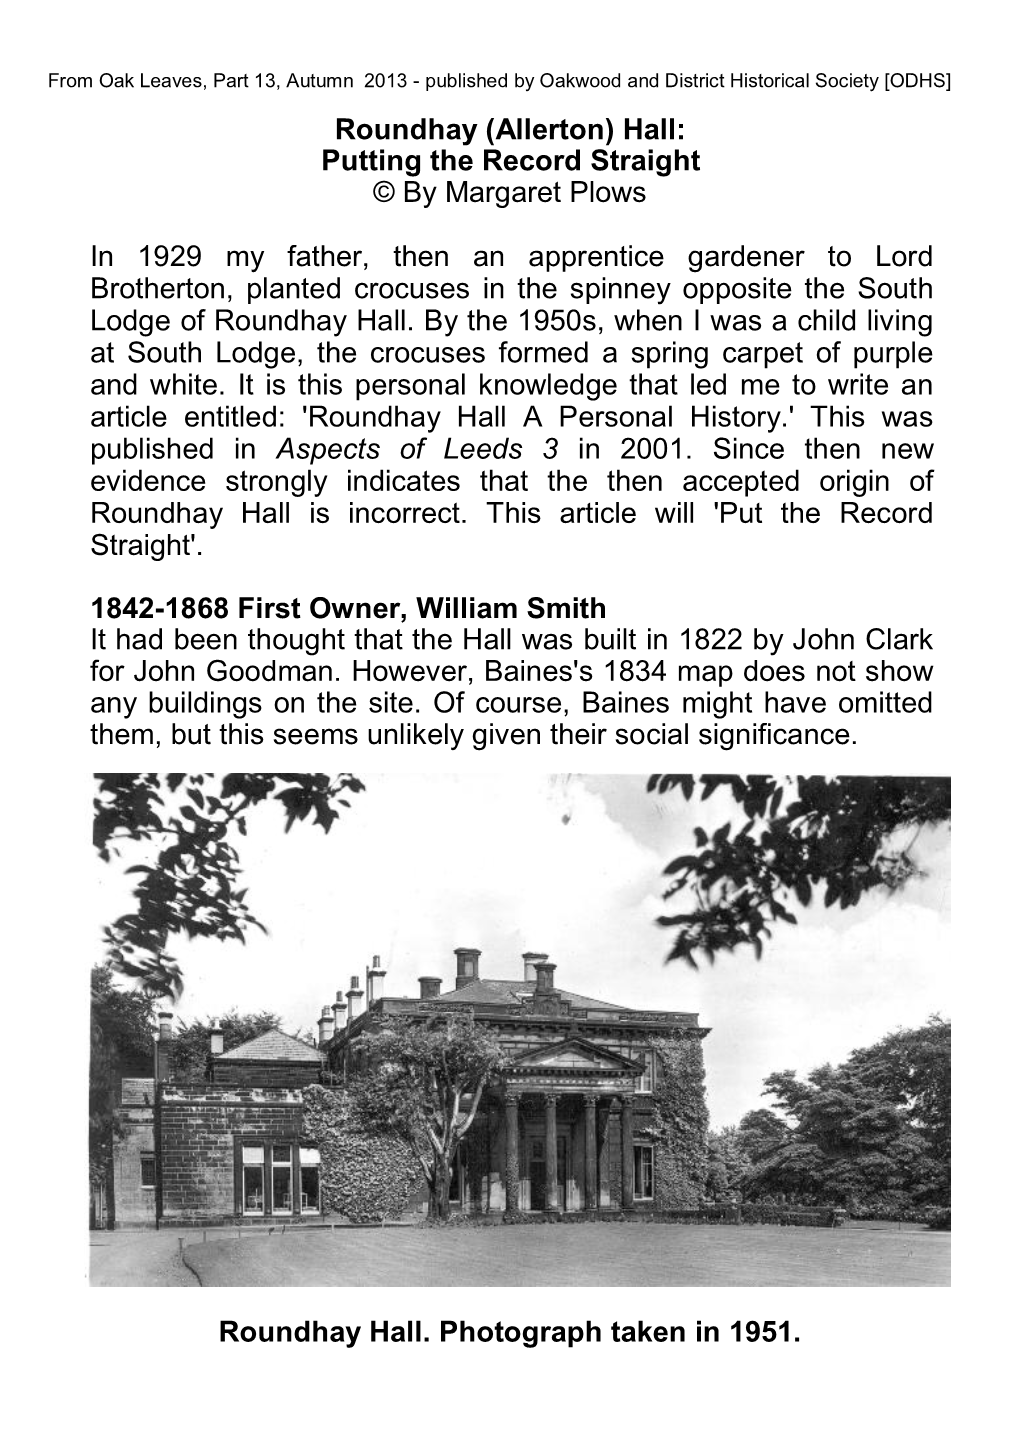 Roundhay (Allerton) Hall: Putting the Record Straight © by Margaret Plows